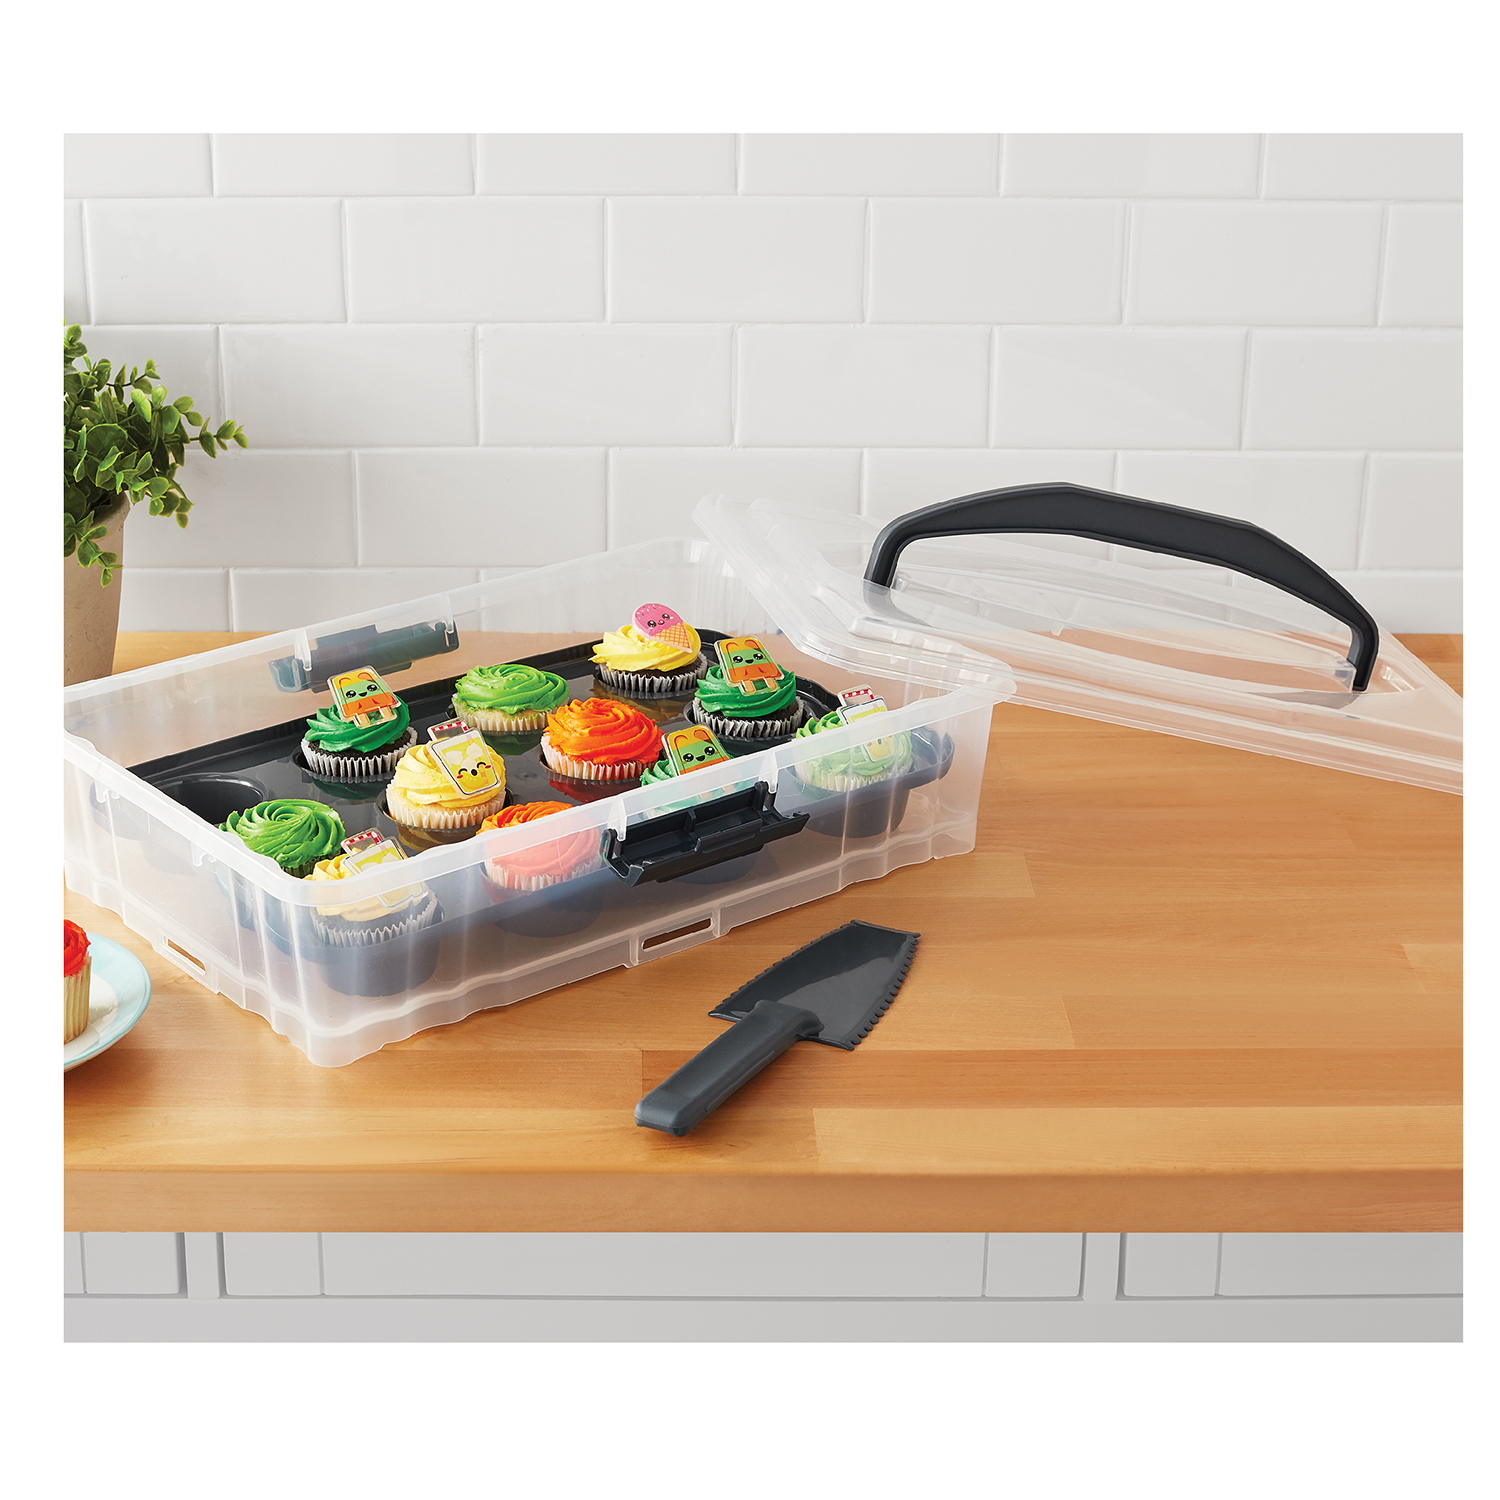 Mainstays Dessert Carrier, Rectangular Design, Clear Plastic with Dark Gray Handle and Clasps, Includes Slice-and-Serve Utensil (1 Each) 18" x 12" x 4.3" - image 2 of 8